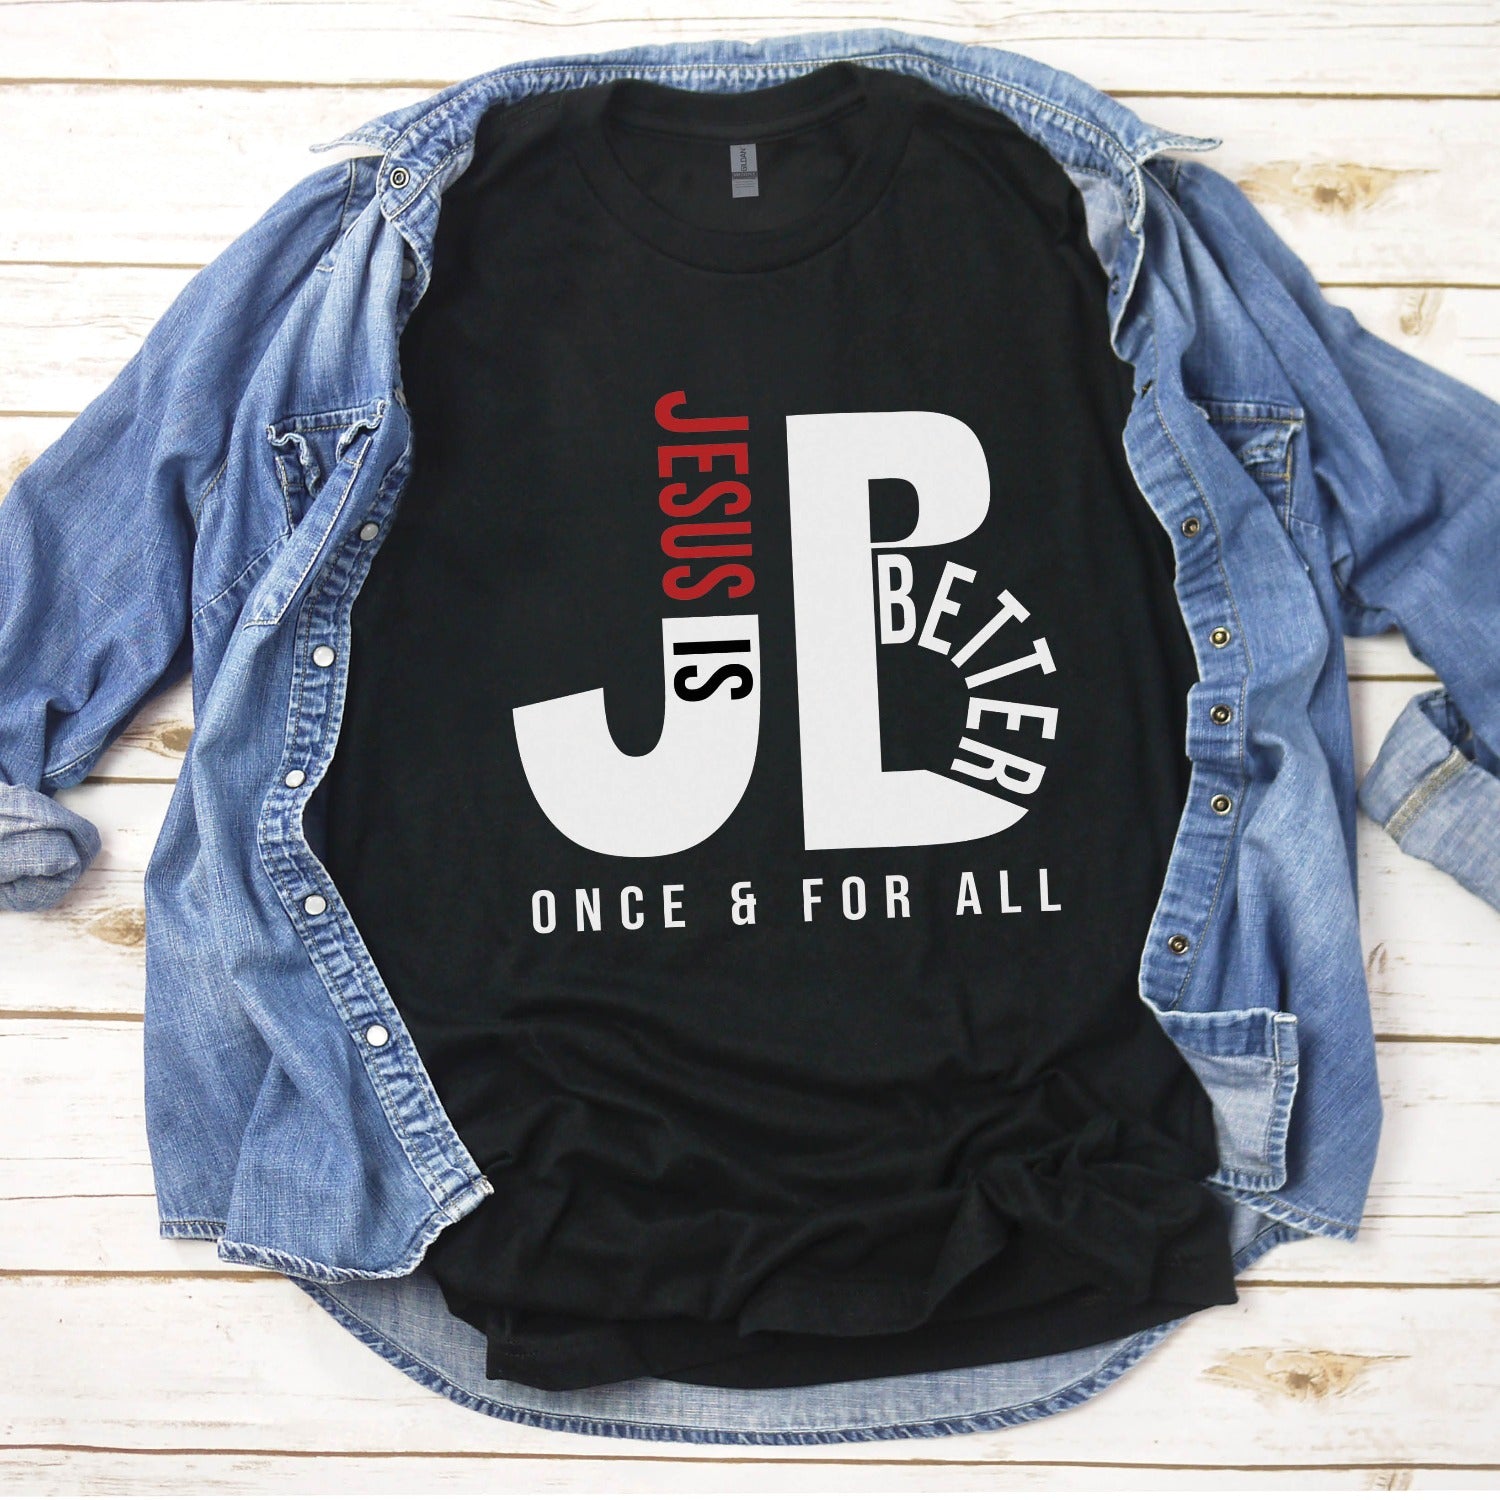 Men's "JB" typography "Jesus is Better Once and For All" design in white and red letters, based on the Christian bible book of Hebrews, printed on a black color Unisex t-shirt, created for faith-based men and women, great father's day dad gift for him